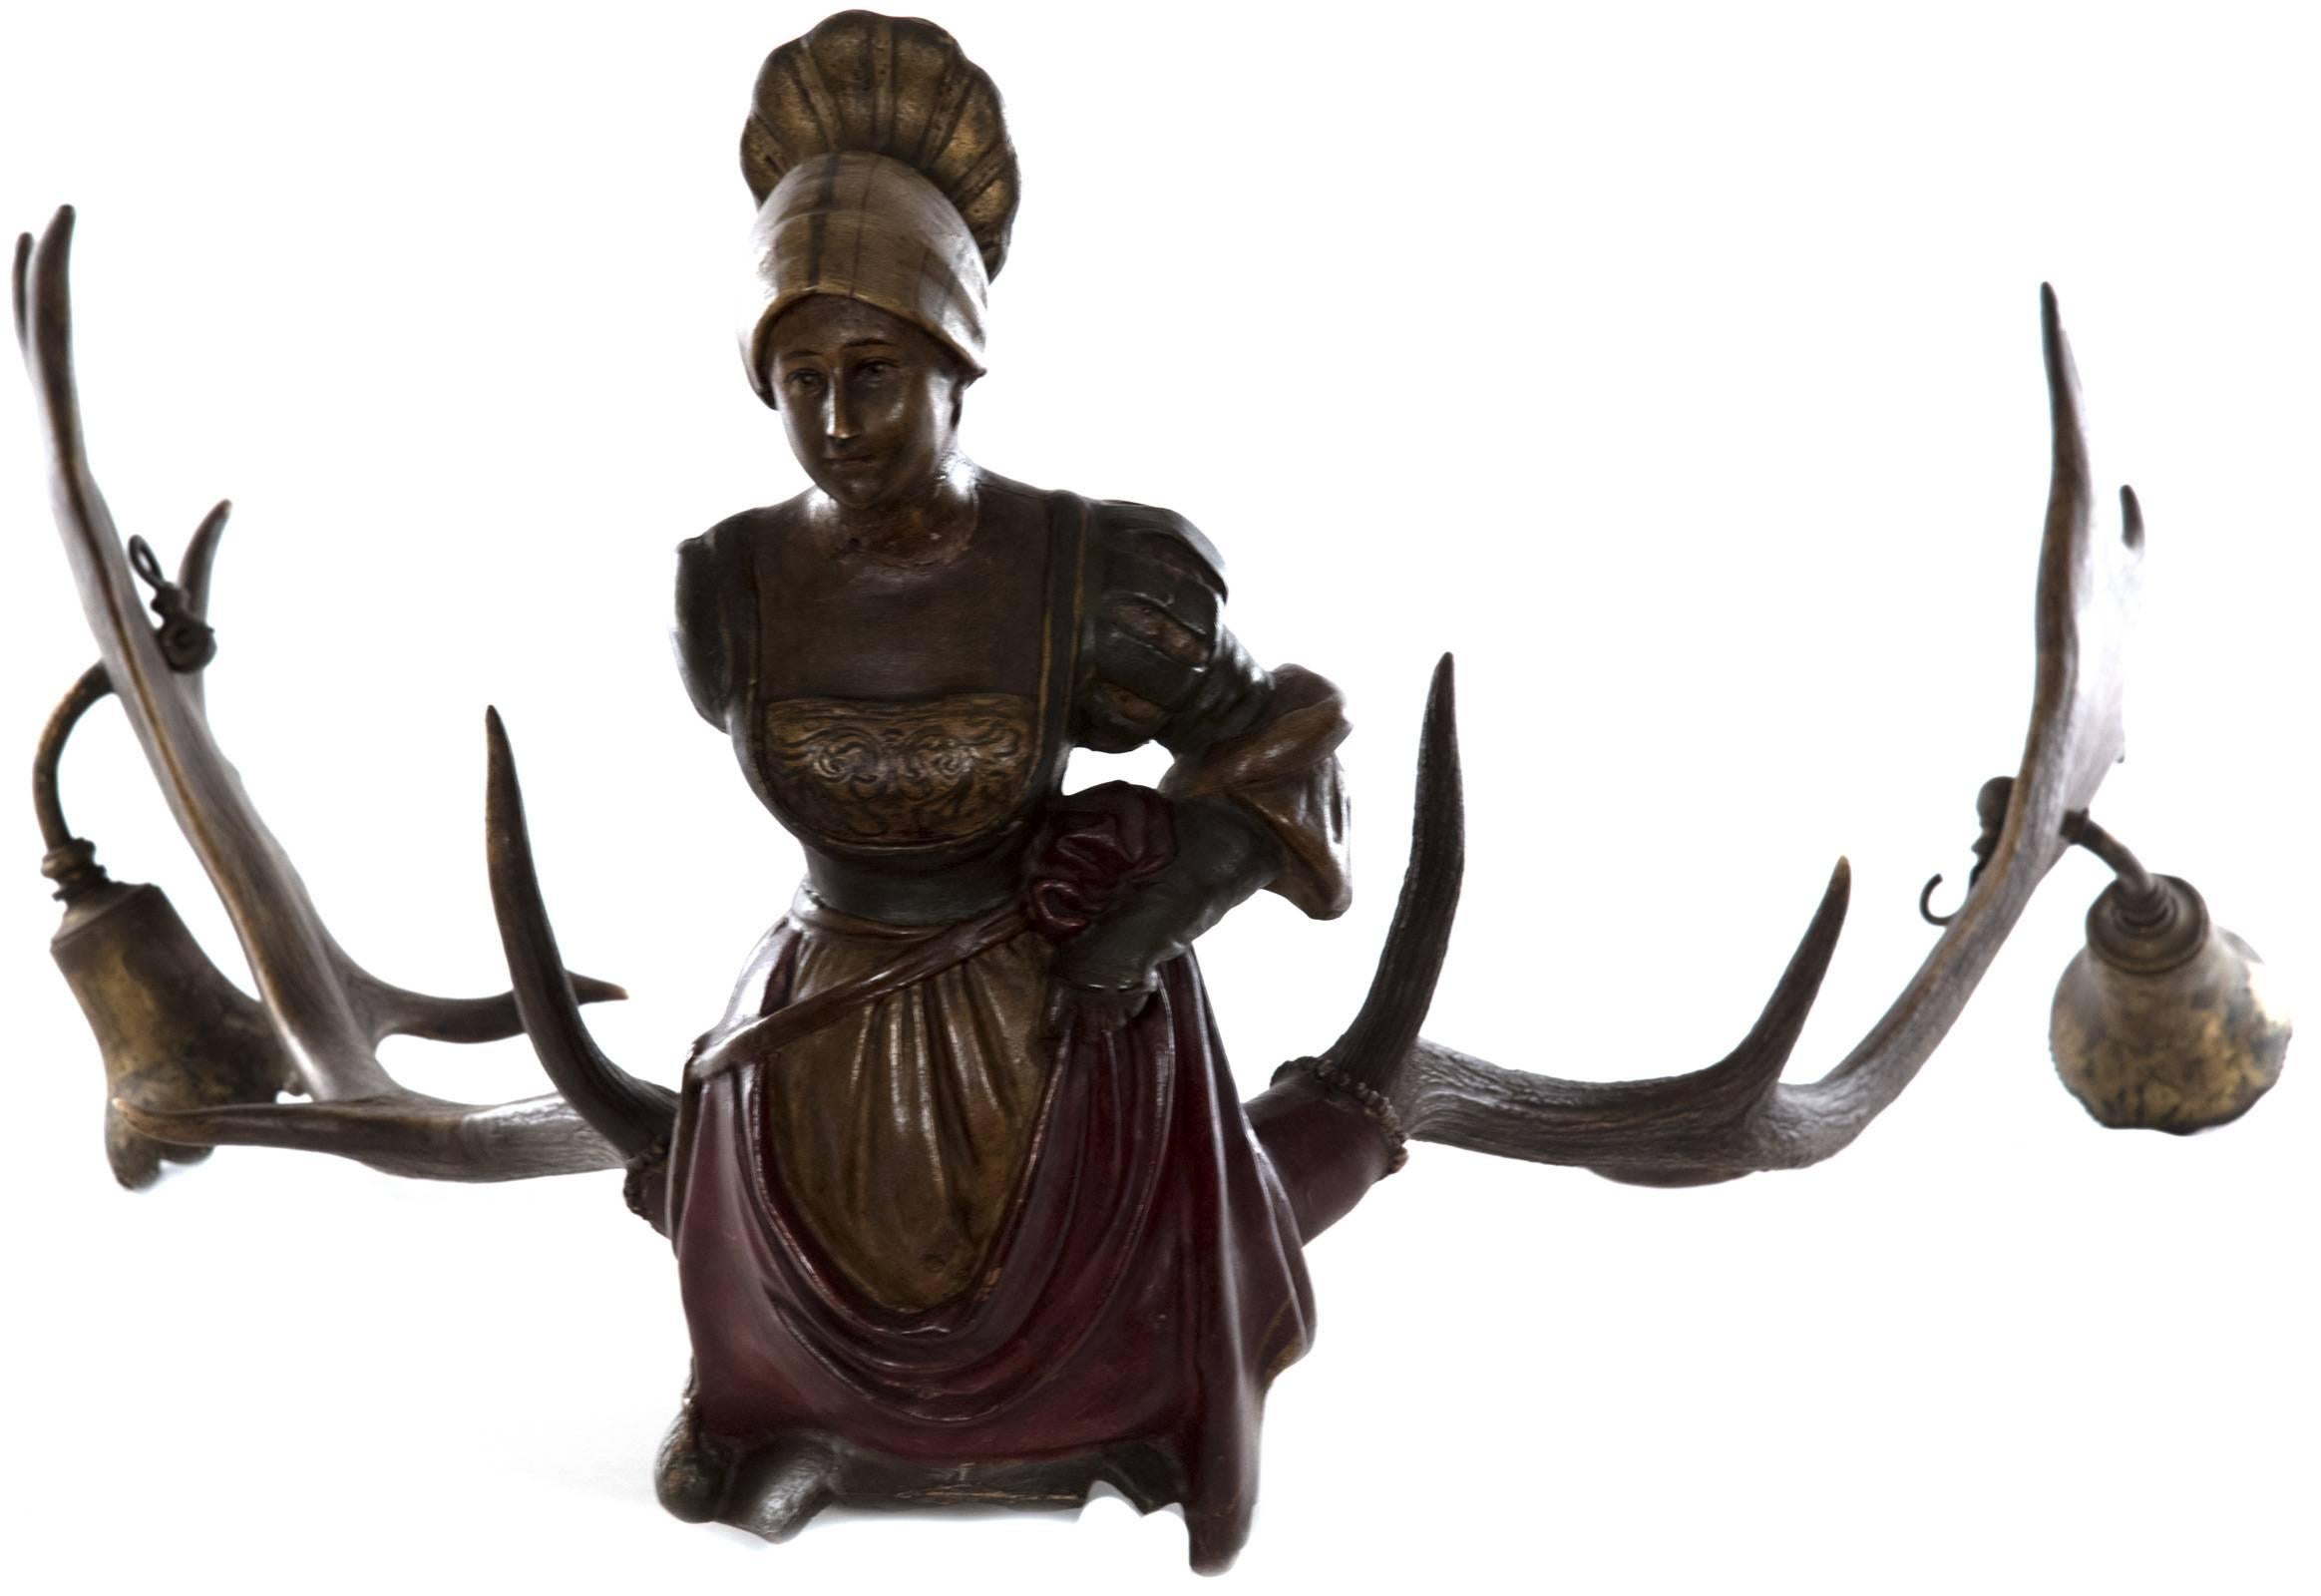 A Lu¨sterweibchen of female form in a richly colored dress and upturned head wrap, with a shield form on the base that depicts an idyllic image of two cherubs smelling roses on a garden bench. Two brass trumpet shaped light fixtures have been